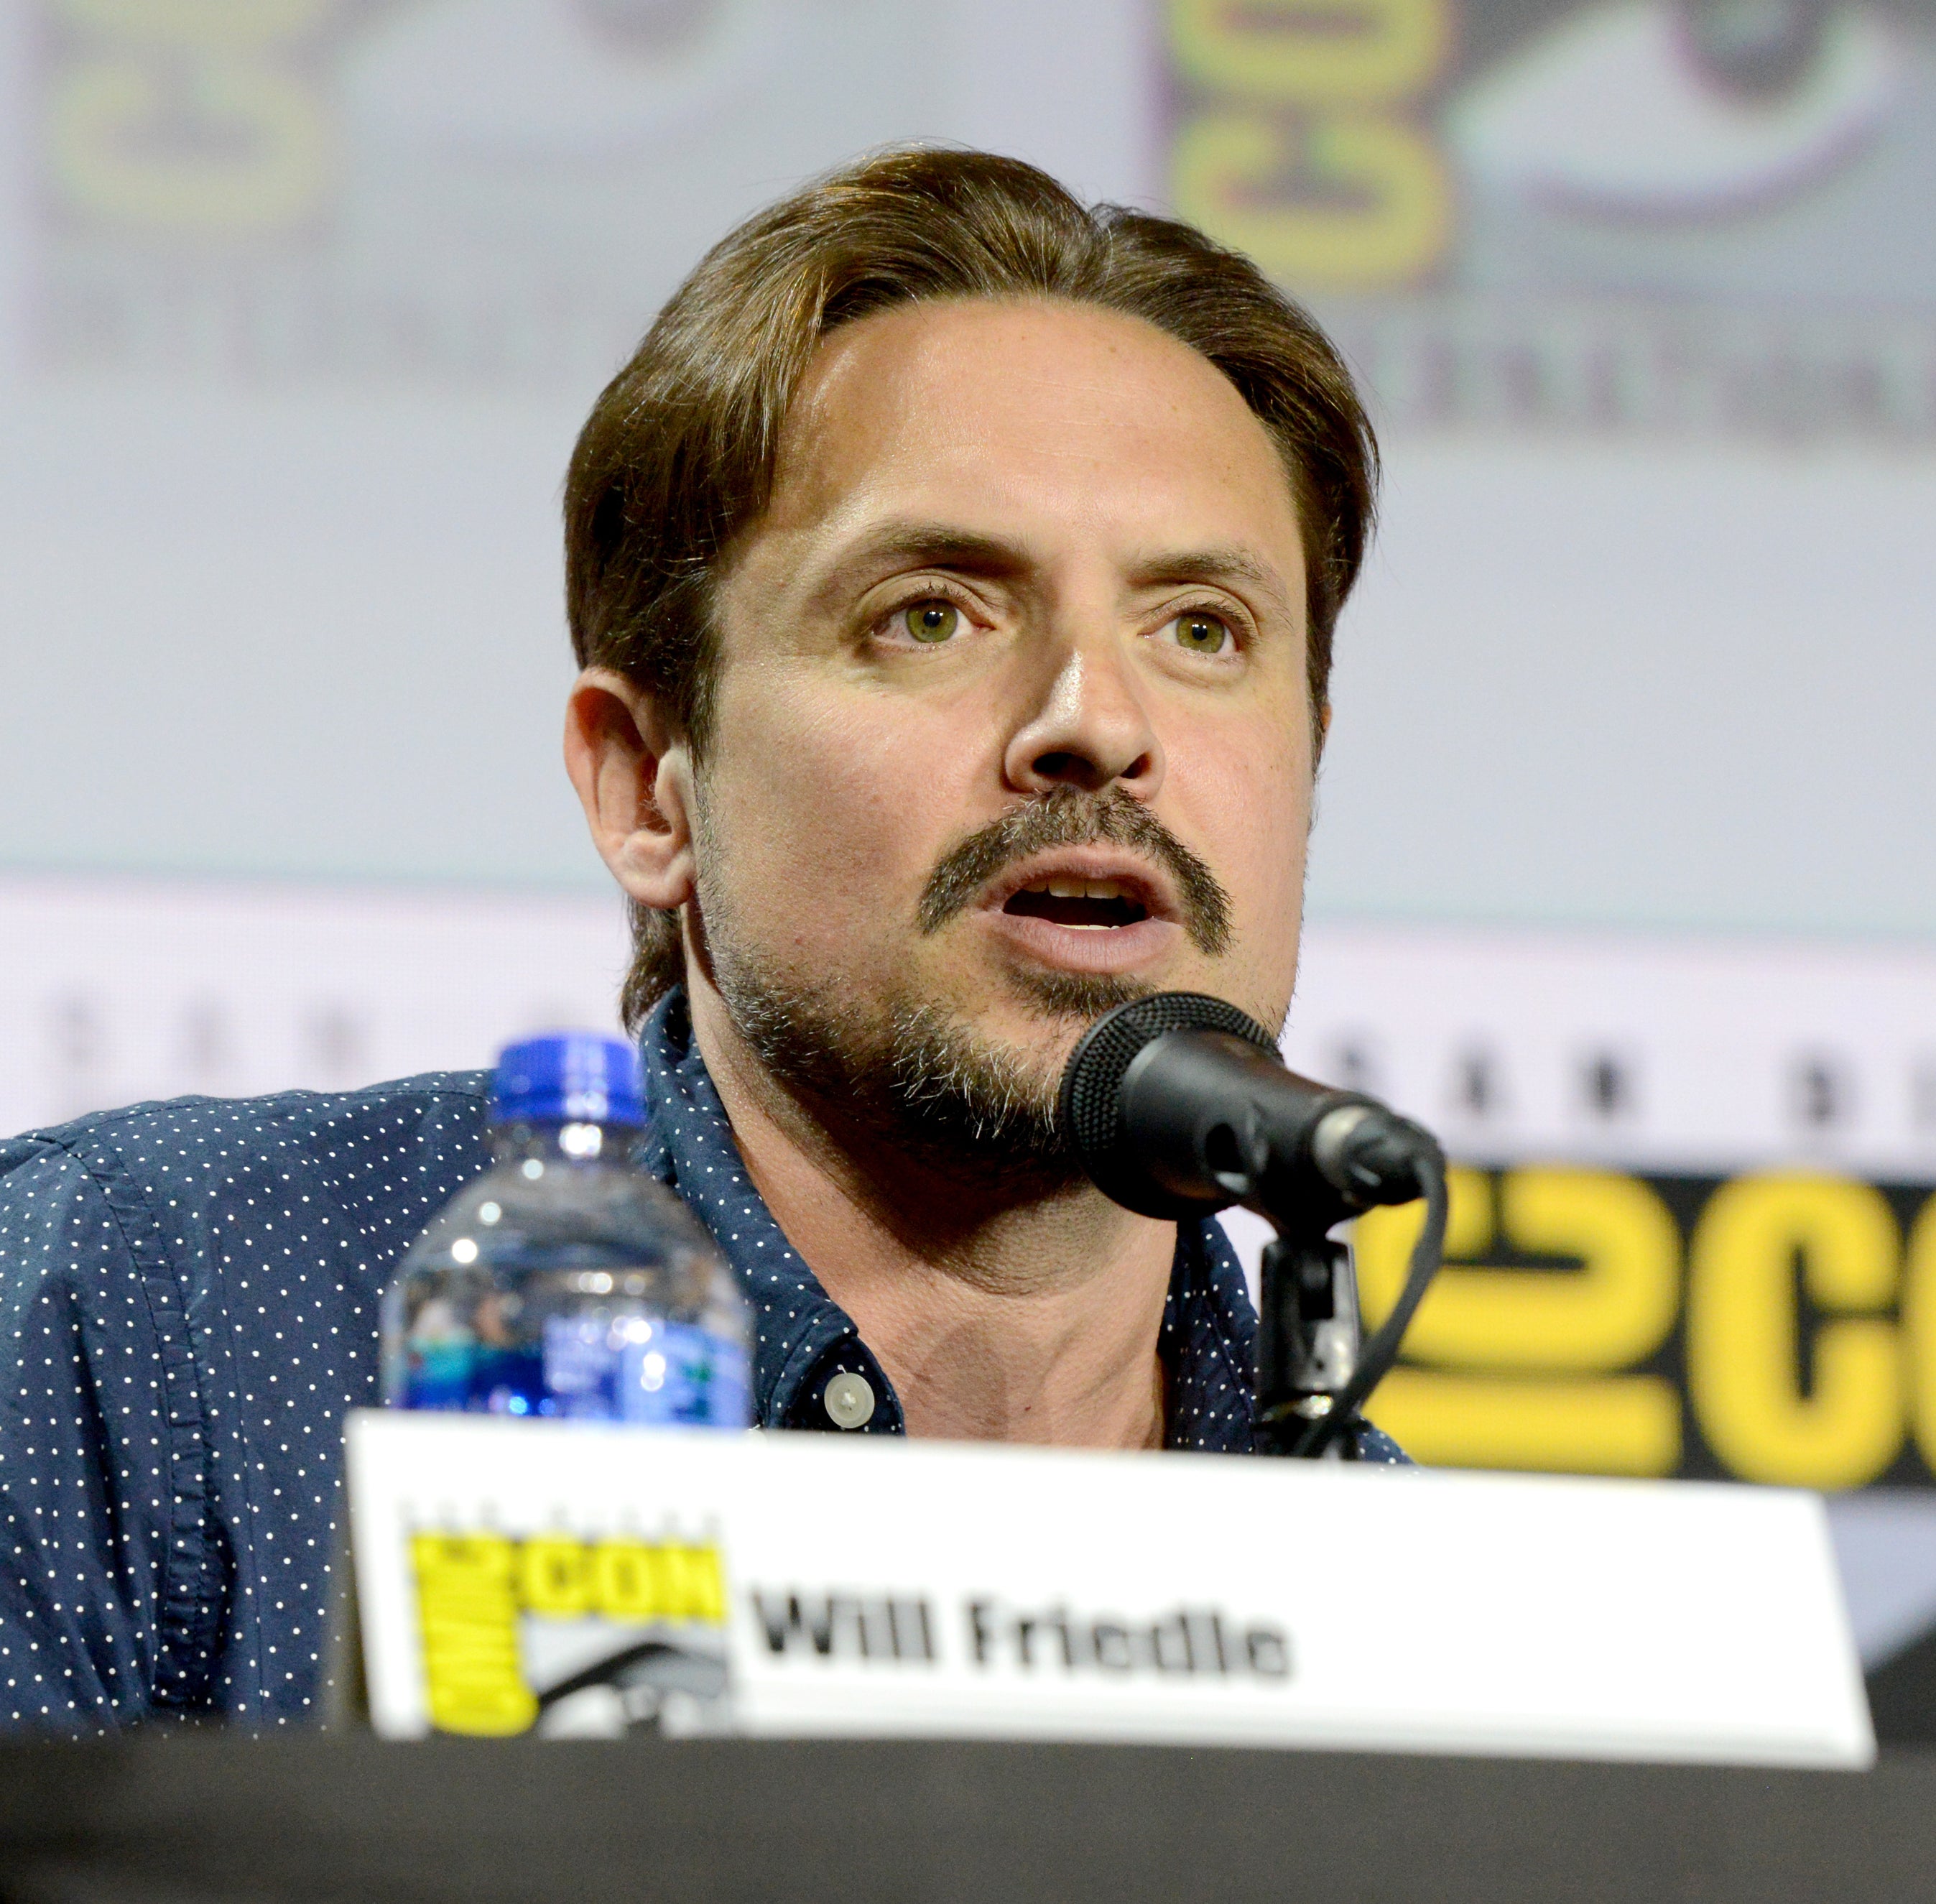 Will Friedle speaking at a Comic-Con panel, dressed in a button-up shirt, microphone in front